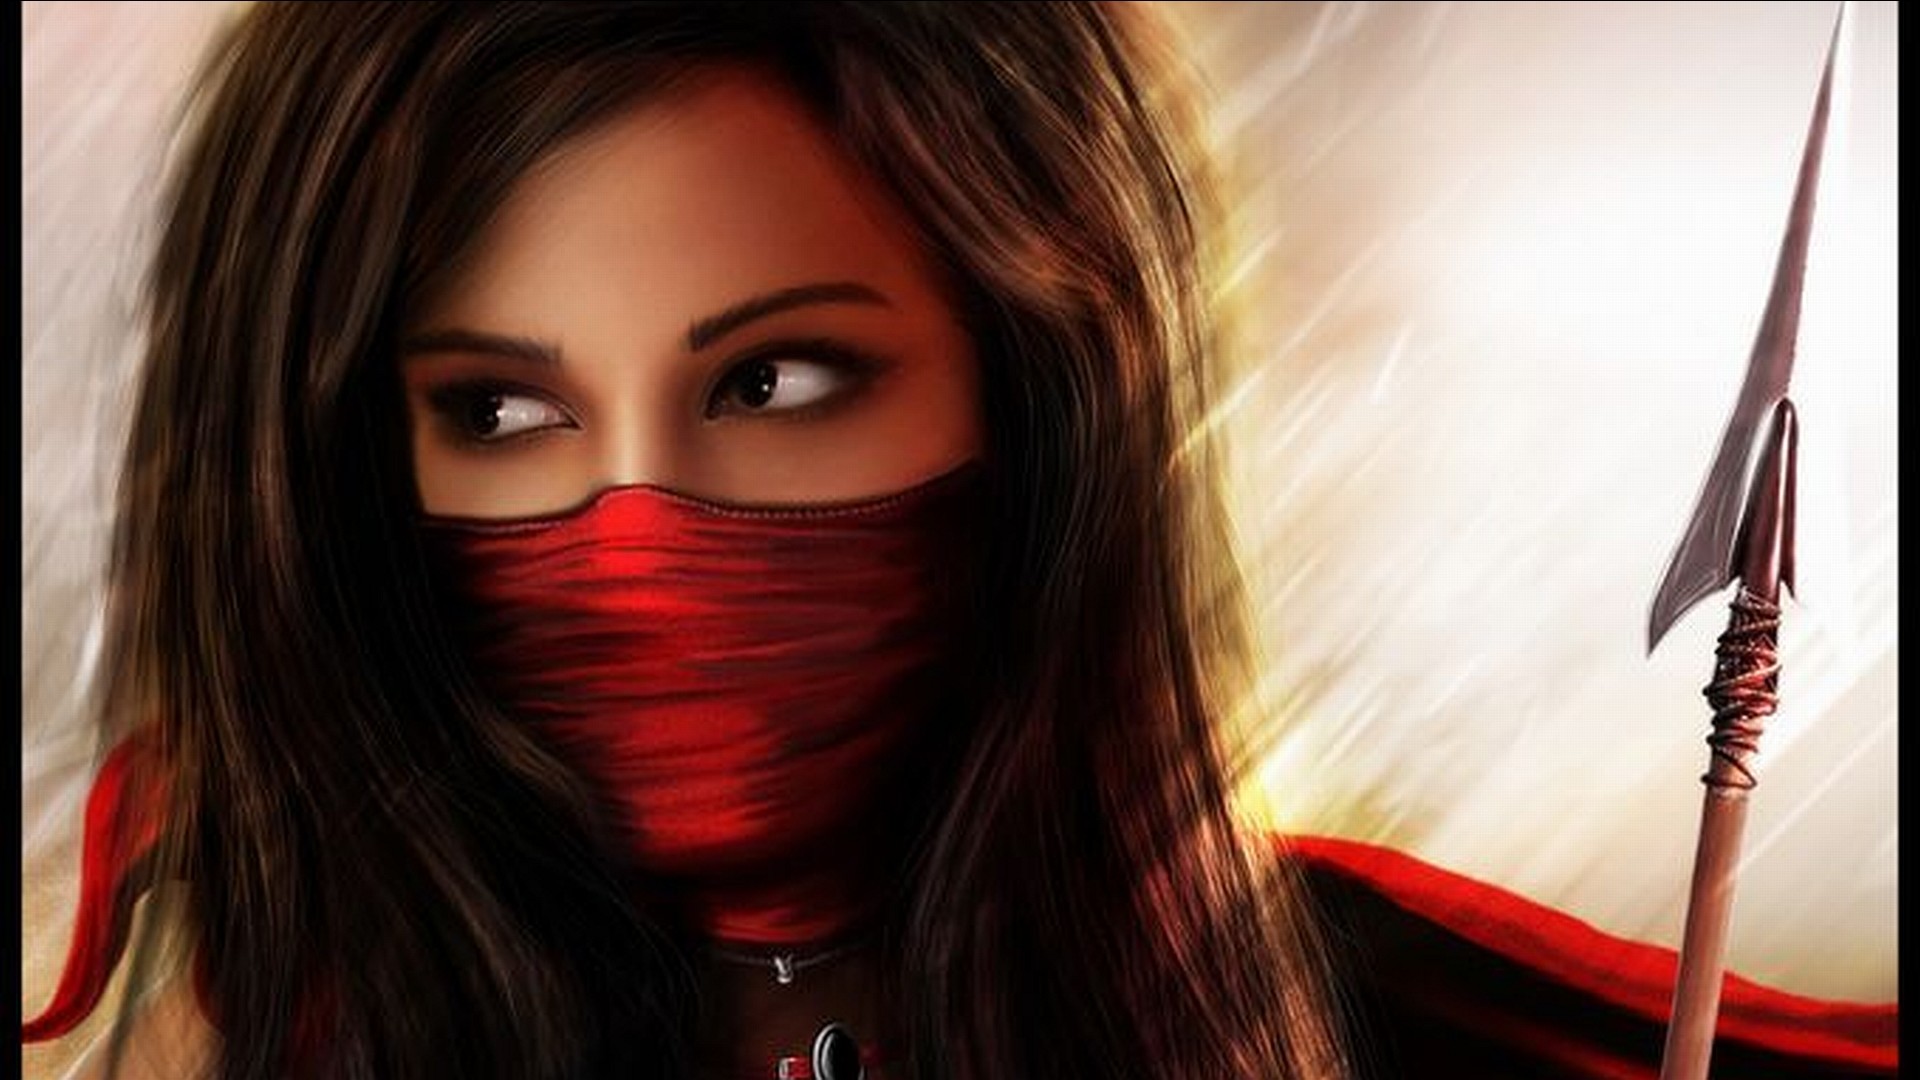 1920x1080 manipulations cg digital art art fantasy warriors spear weapons brunettes  face mask eyes jewelry light backlit scarf maiden red colors women females  girls ...